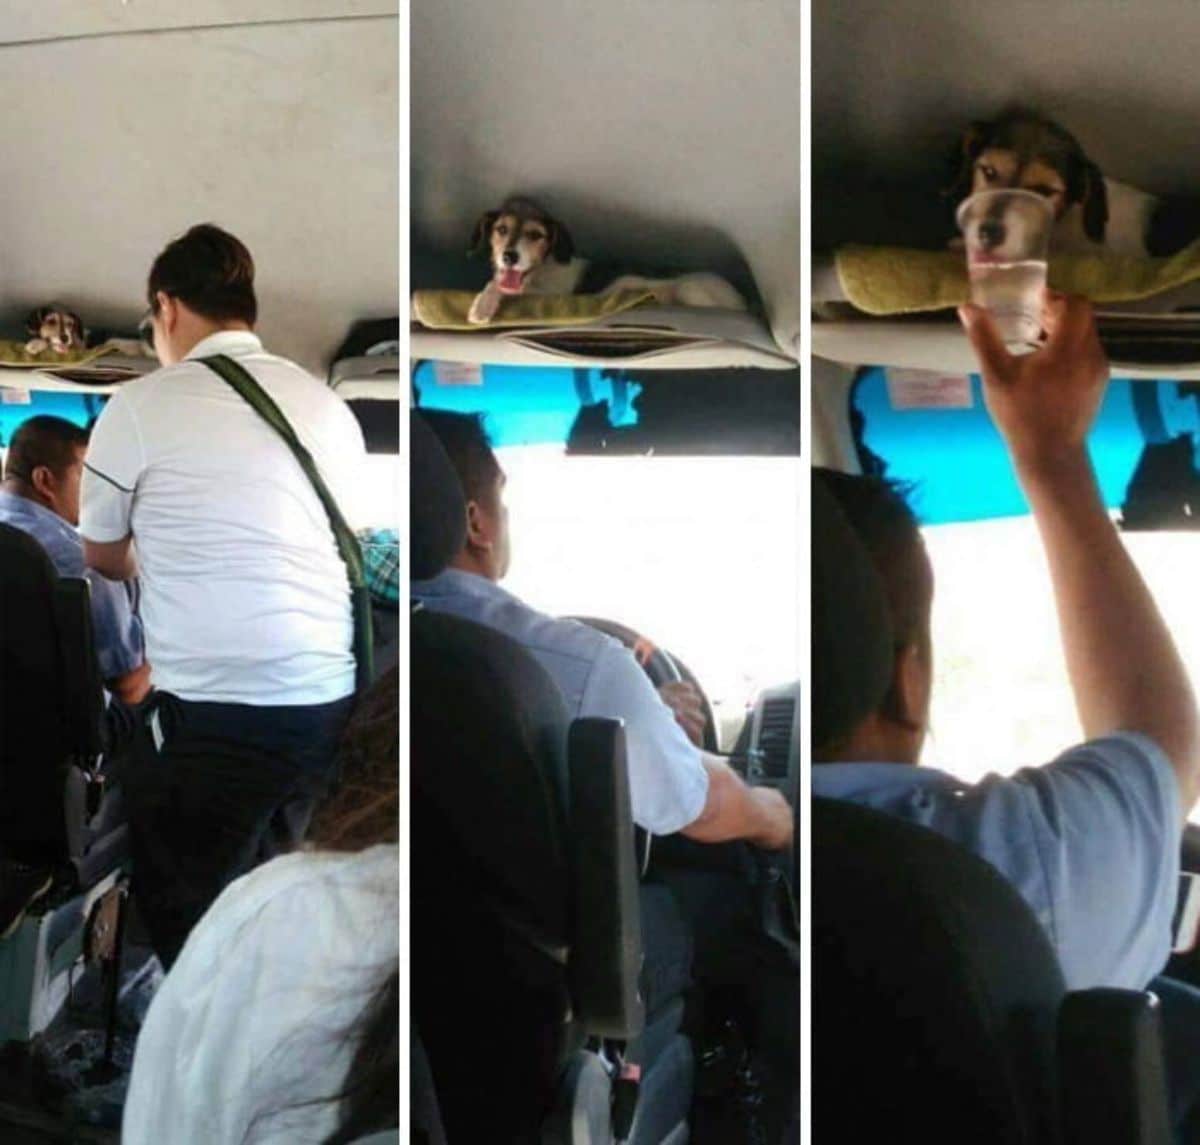 three photos of a brown and white dog in a bus compartment above the driver drinking water from a plastic cup